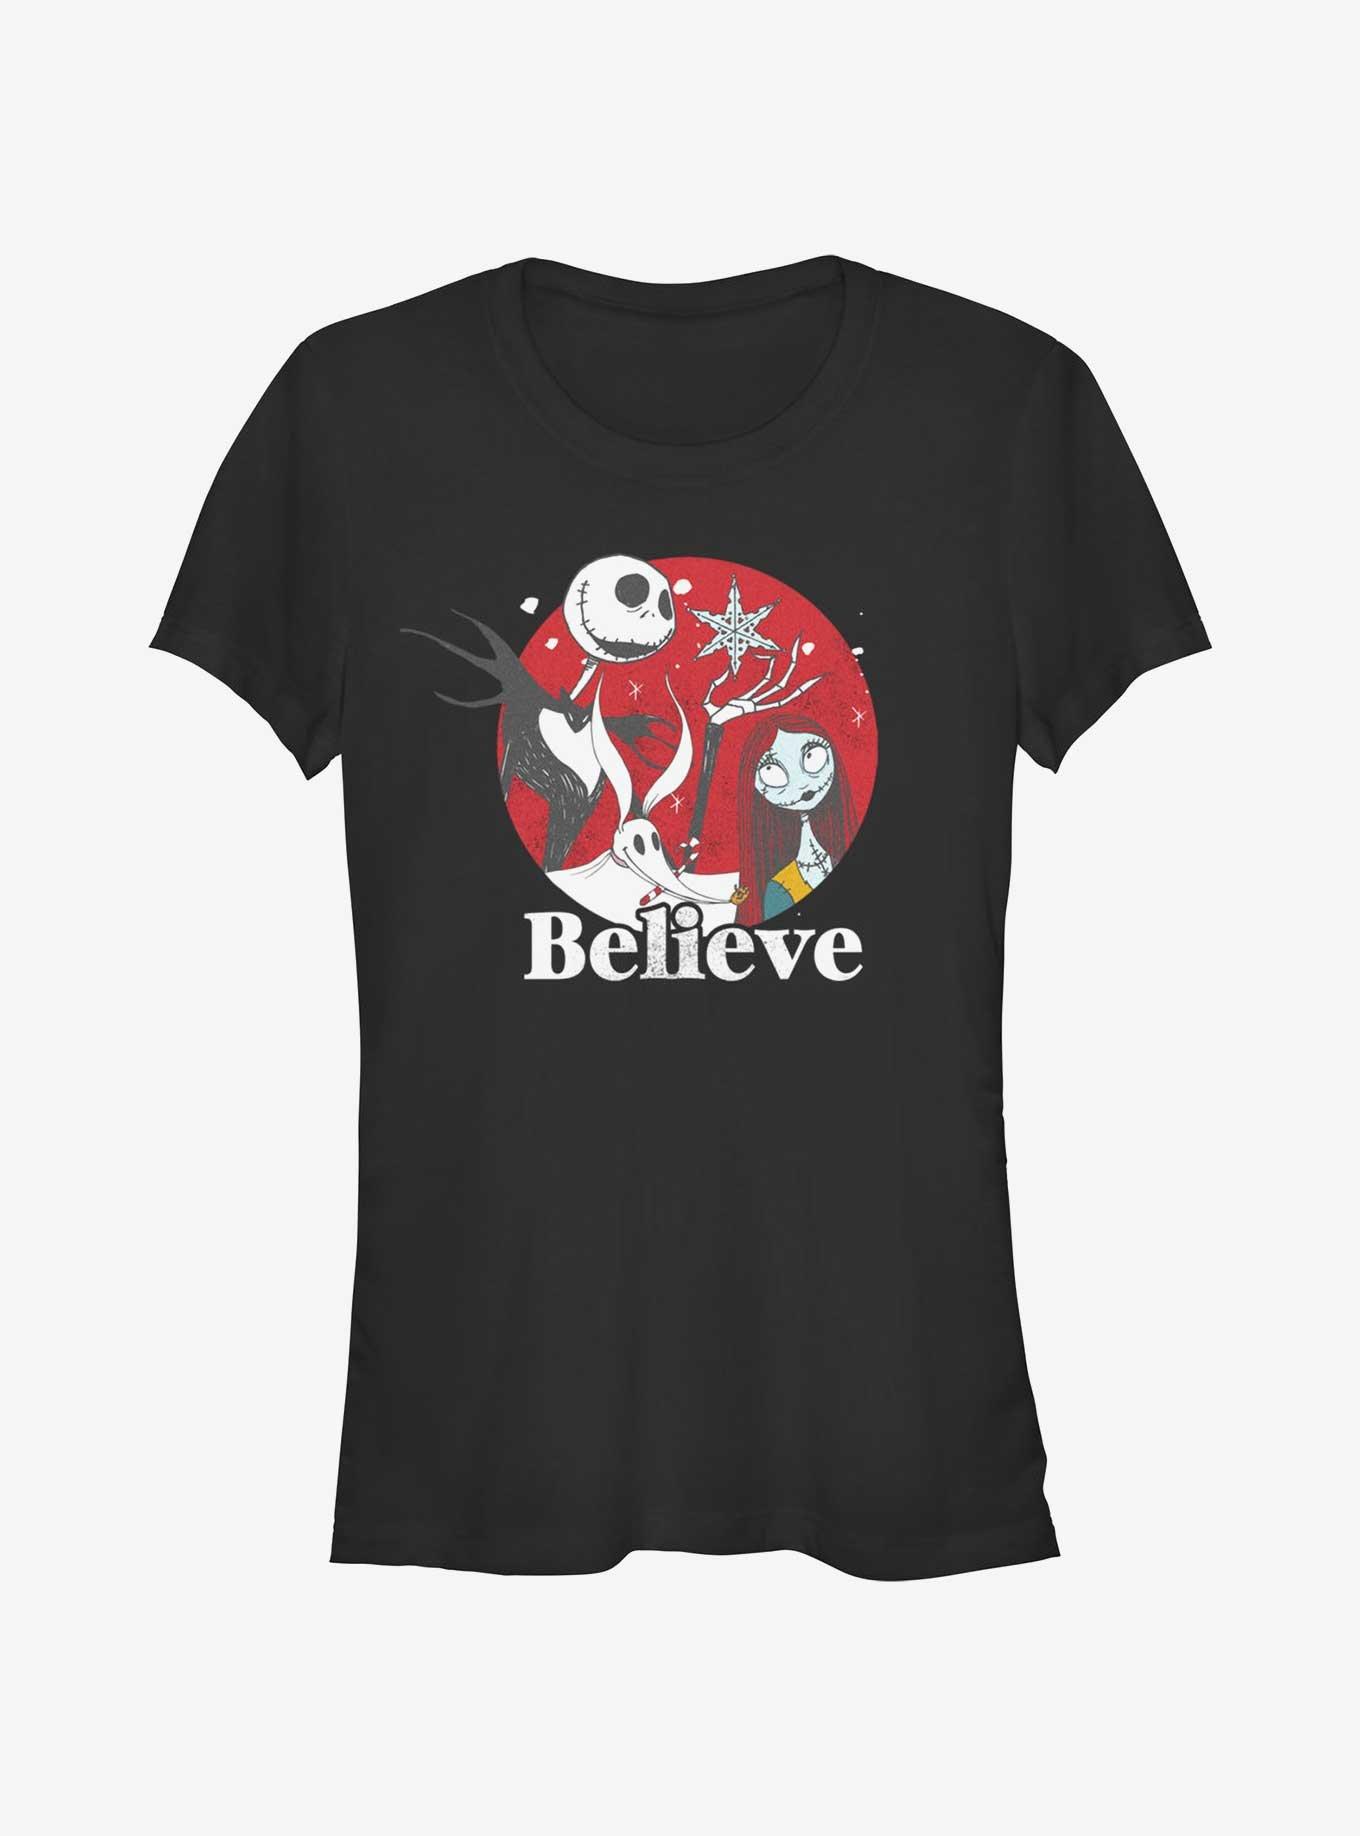 Disney The Nightmare Before Christmas Jack And Sally Believe Girls T-Shirt, BLACK, hi-res